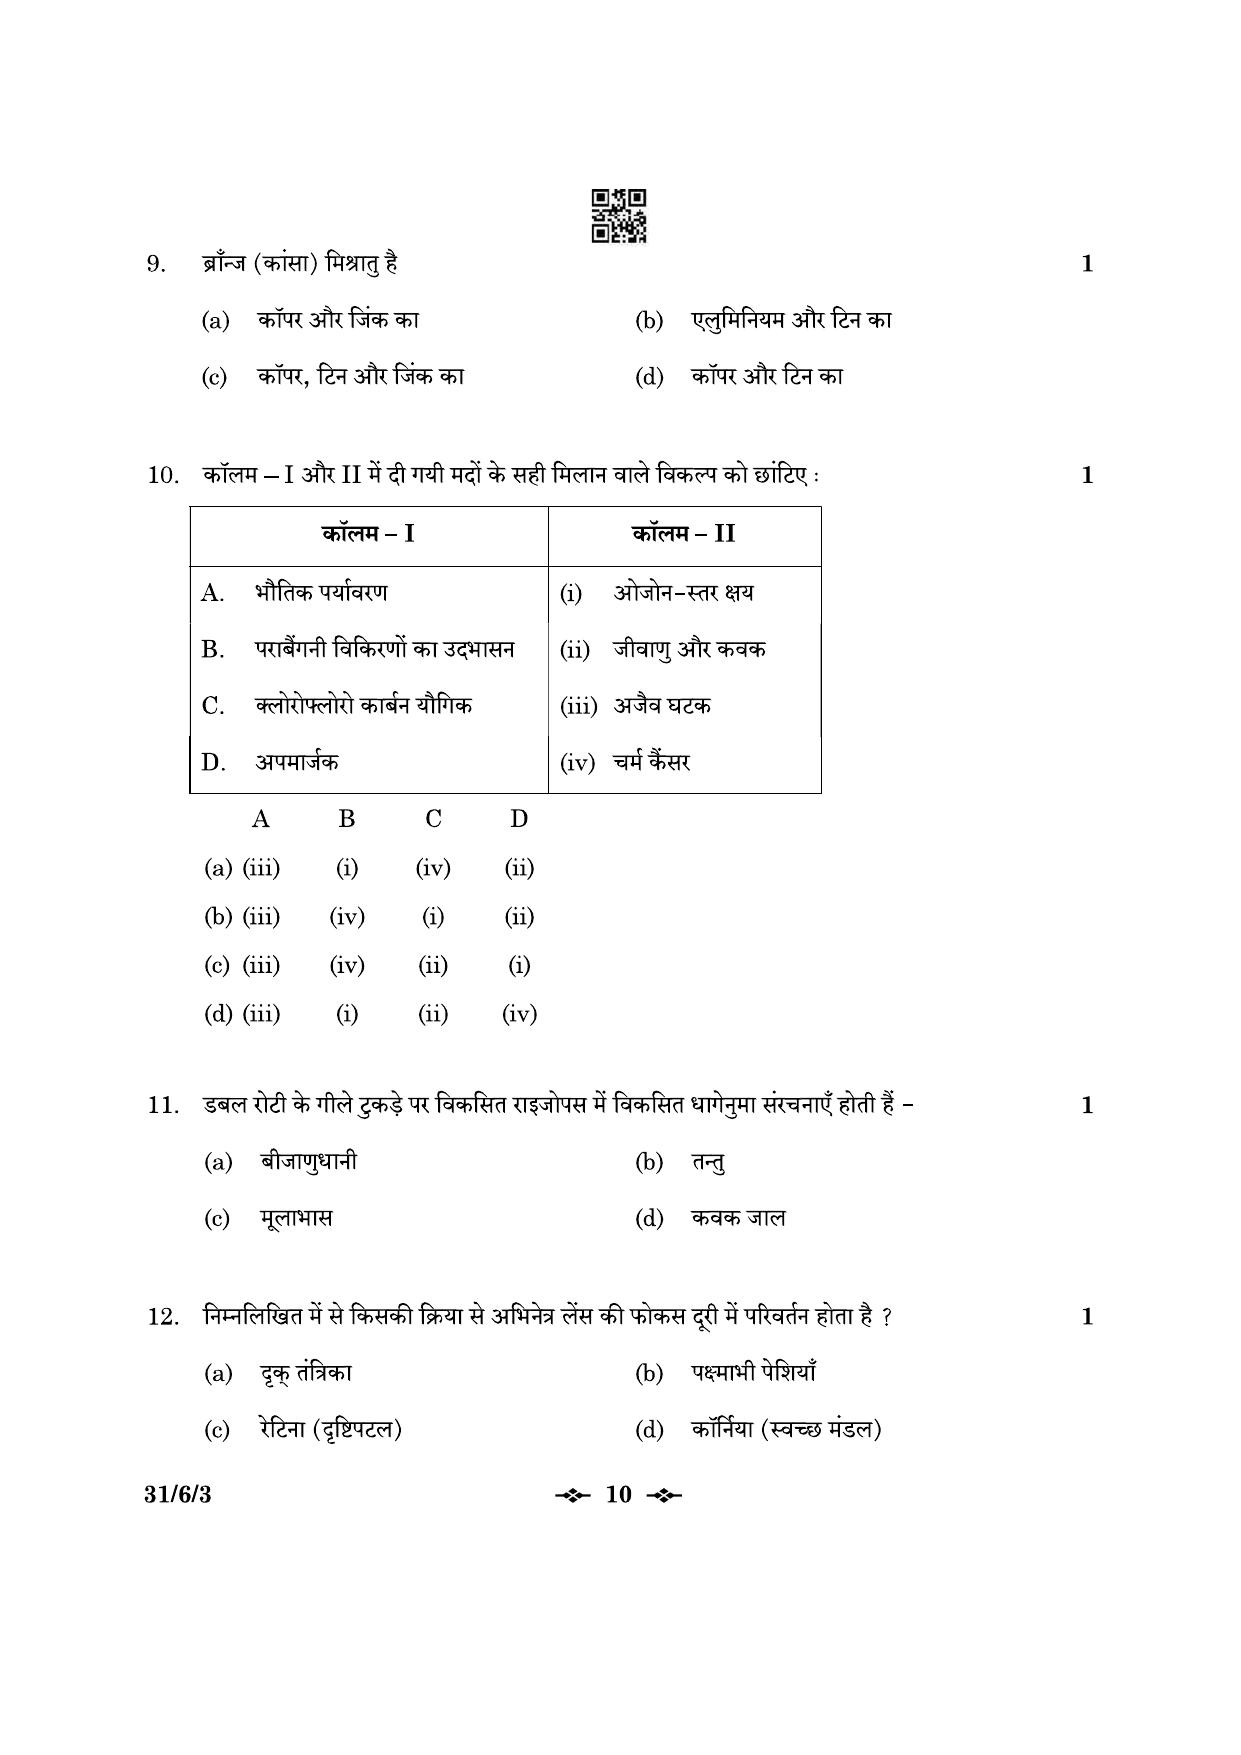 CBSE Class 10 31-6-3 Science 2023 Question Paper - Page 10